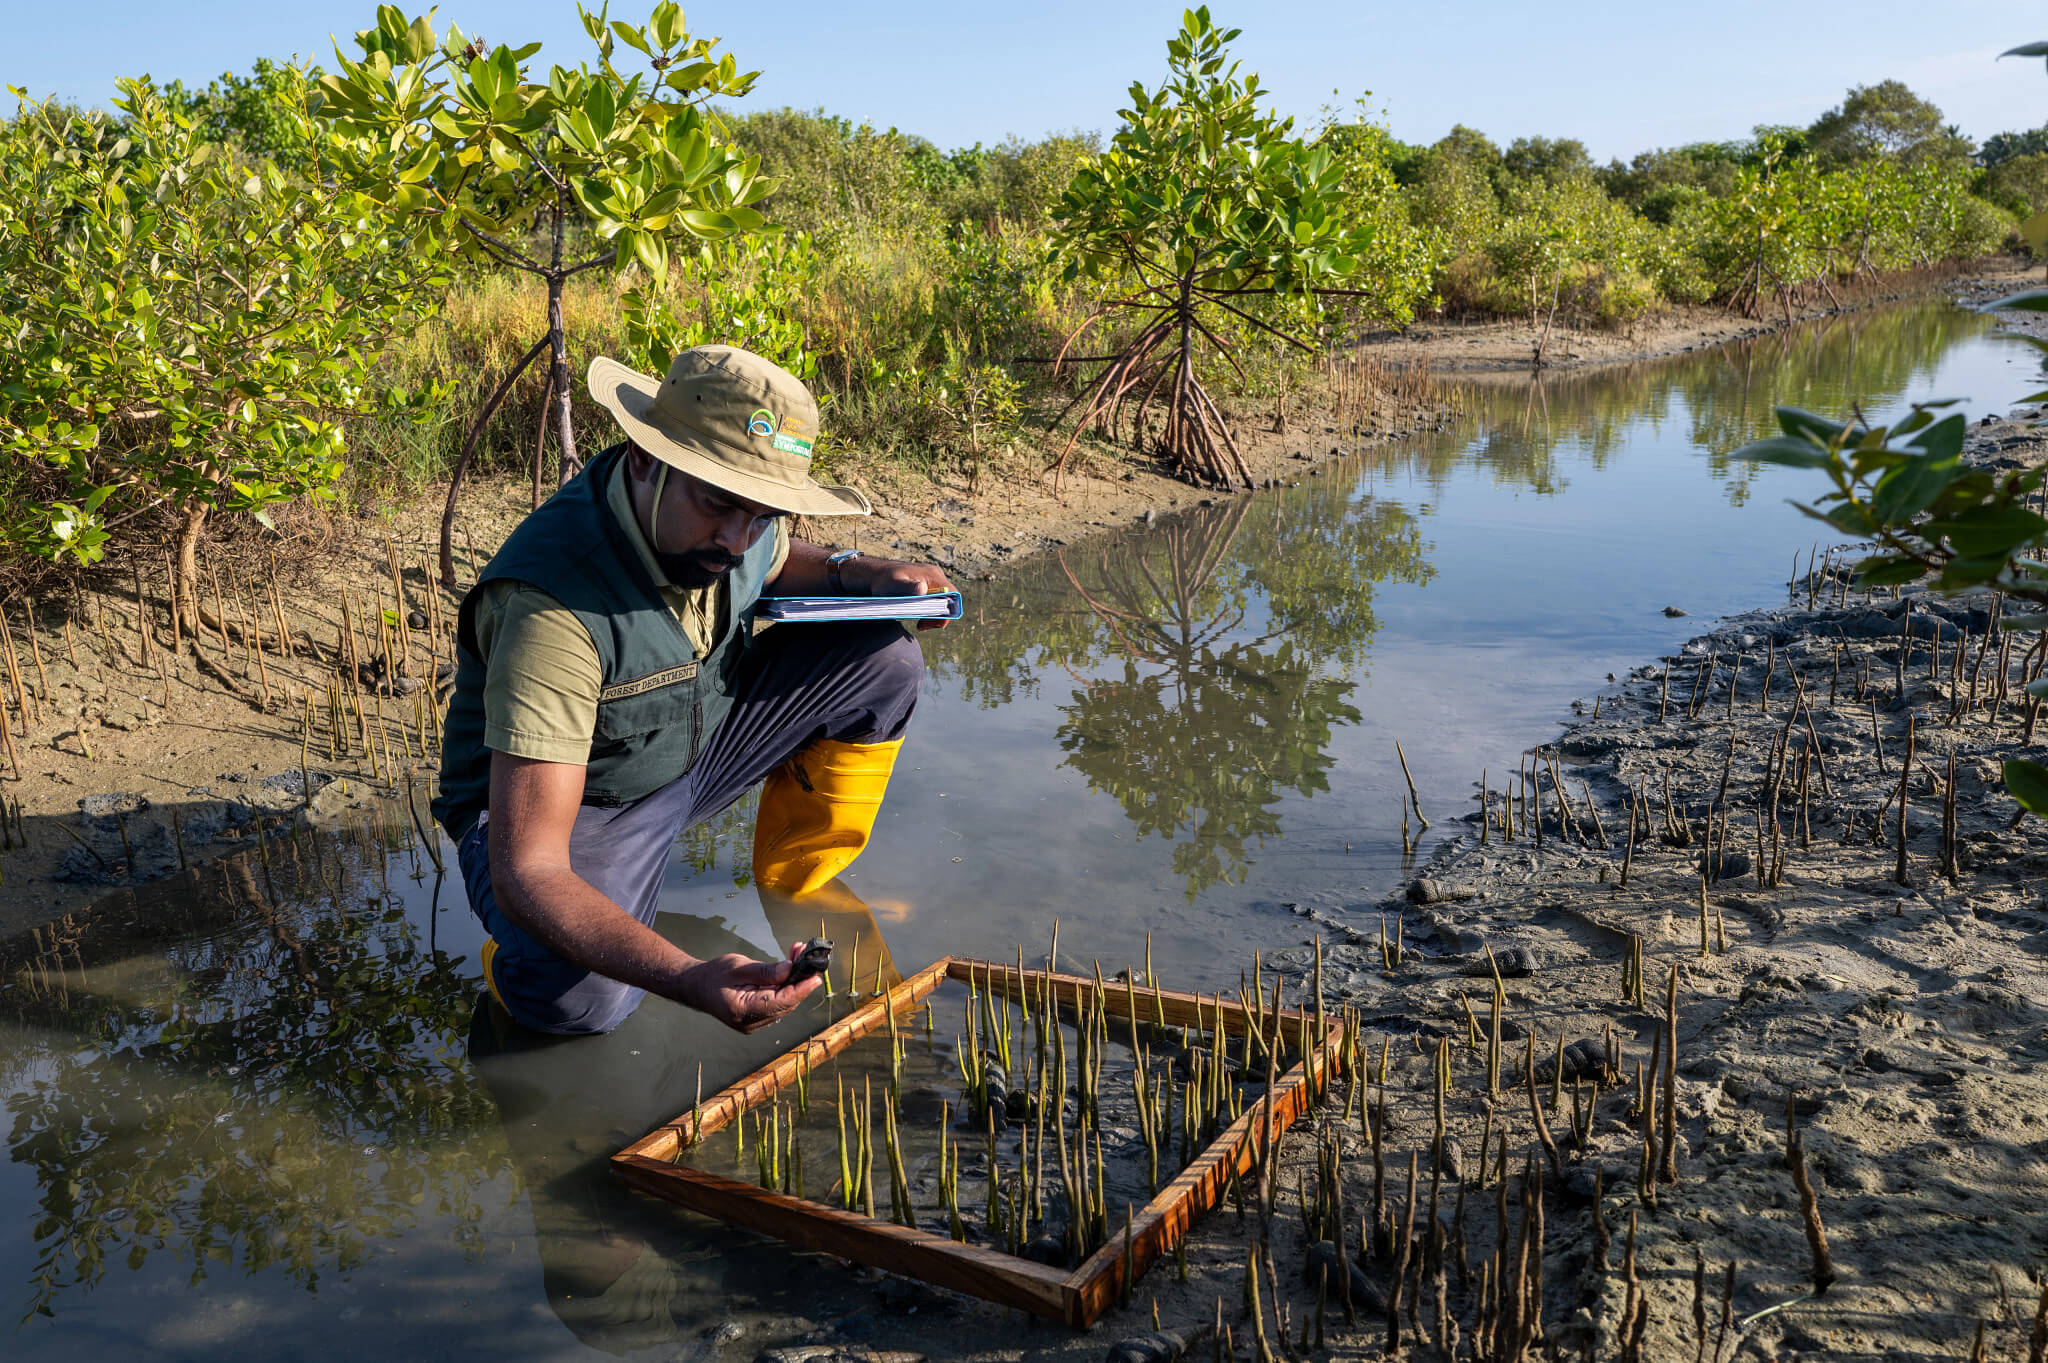 A man is planting mangrove trees in a river